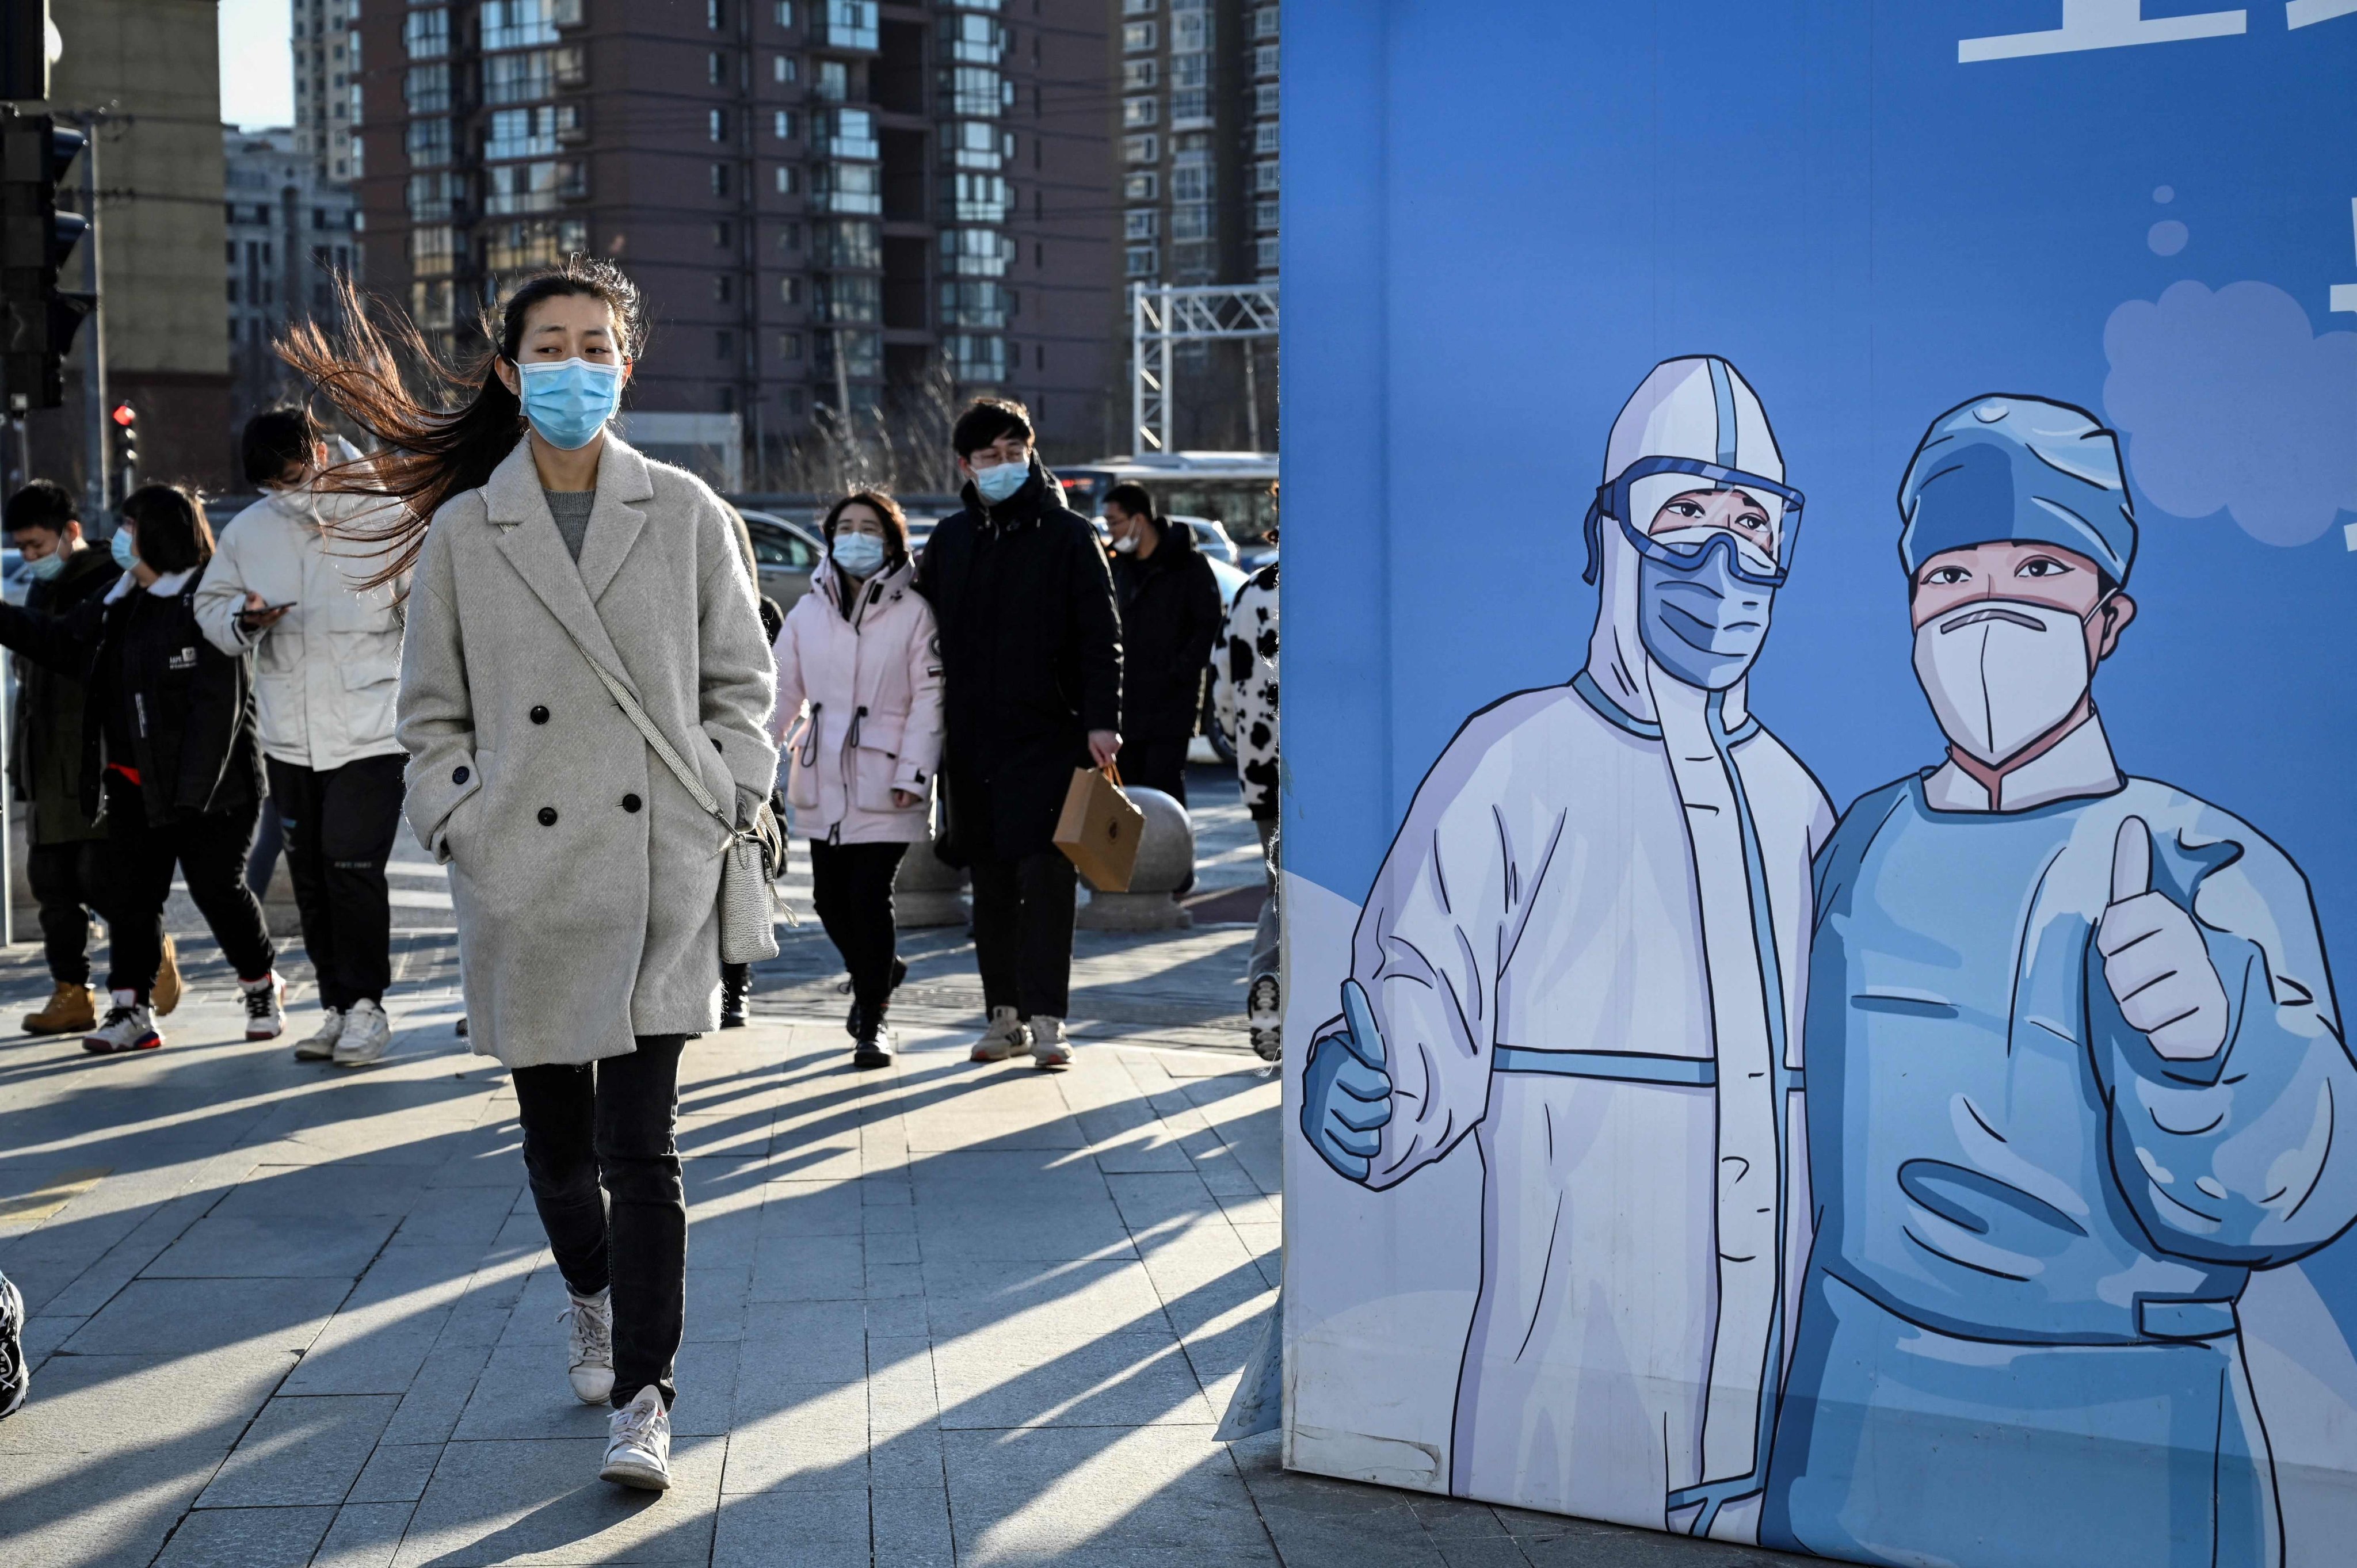 A billboard promoting vaccinations outside a shopping mall in Beijing. Photo: AFP